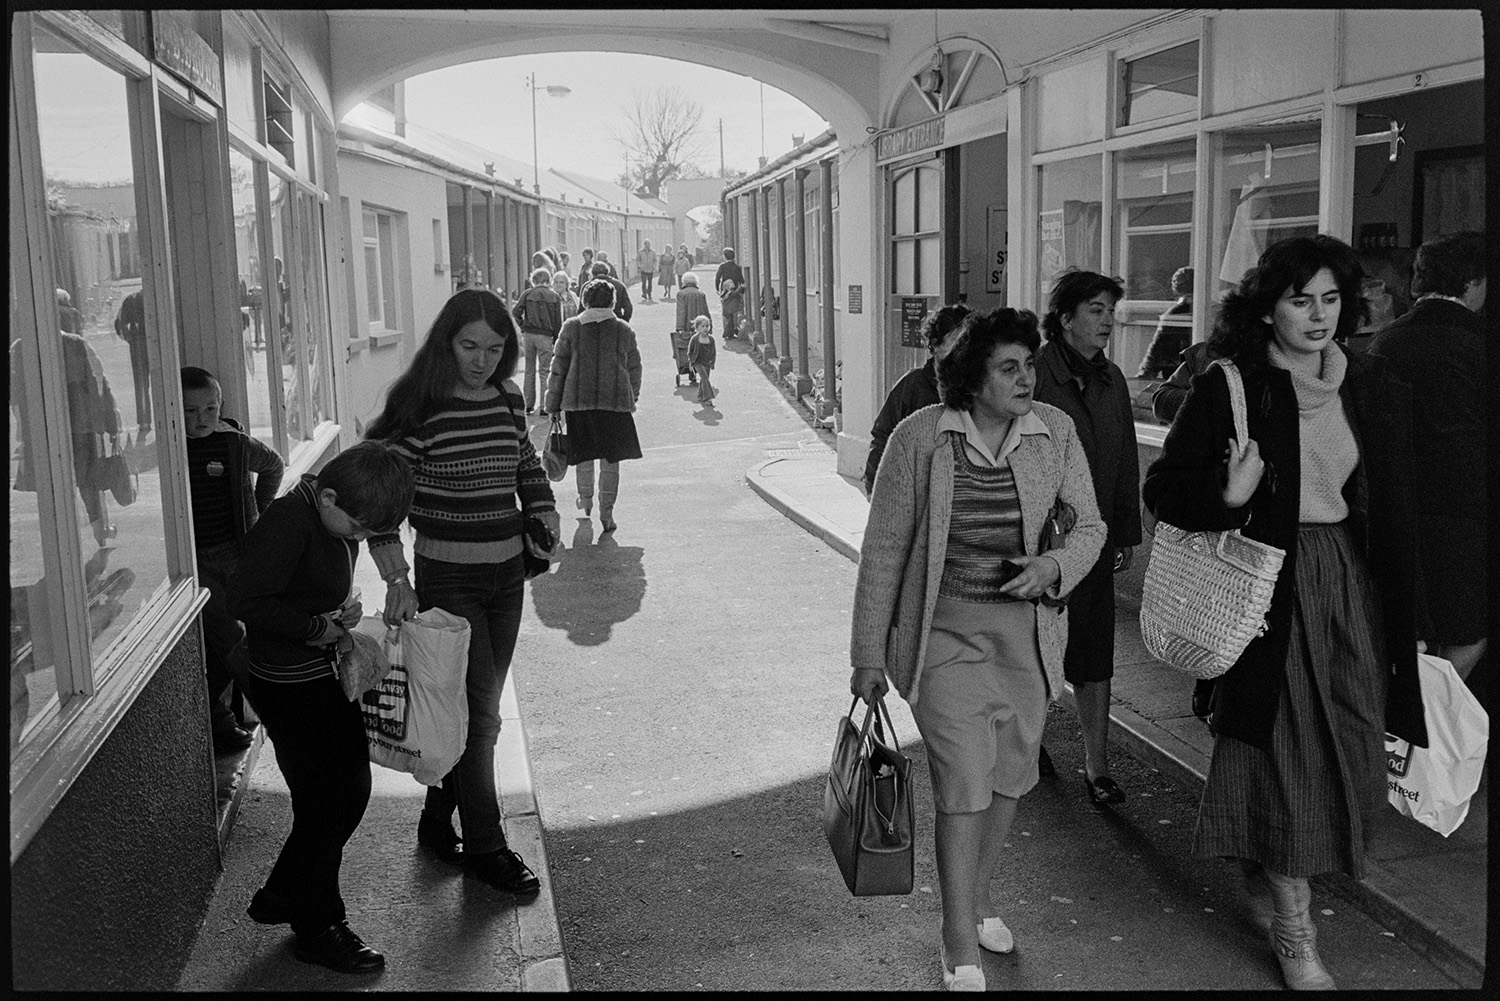 Shoppers in market row. 
[Shoppers walking along Market Row, Torrington. A woman and two children are coming out of a shop doorway.]